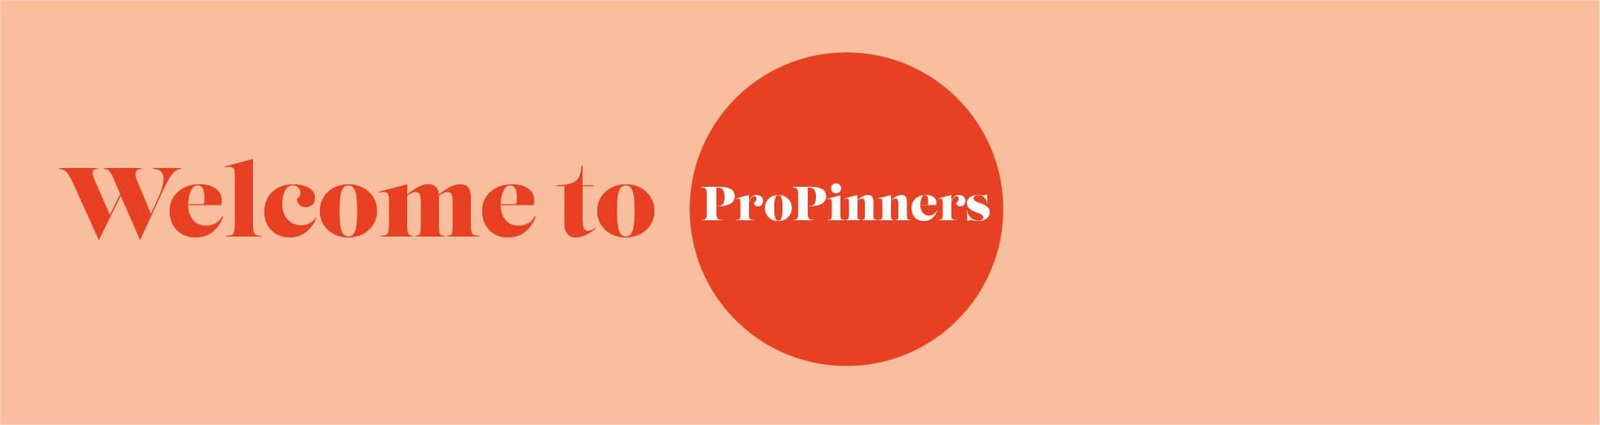 Welcome to ProPinners